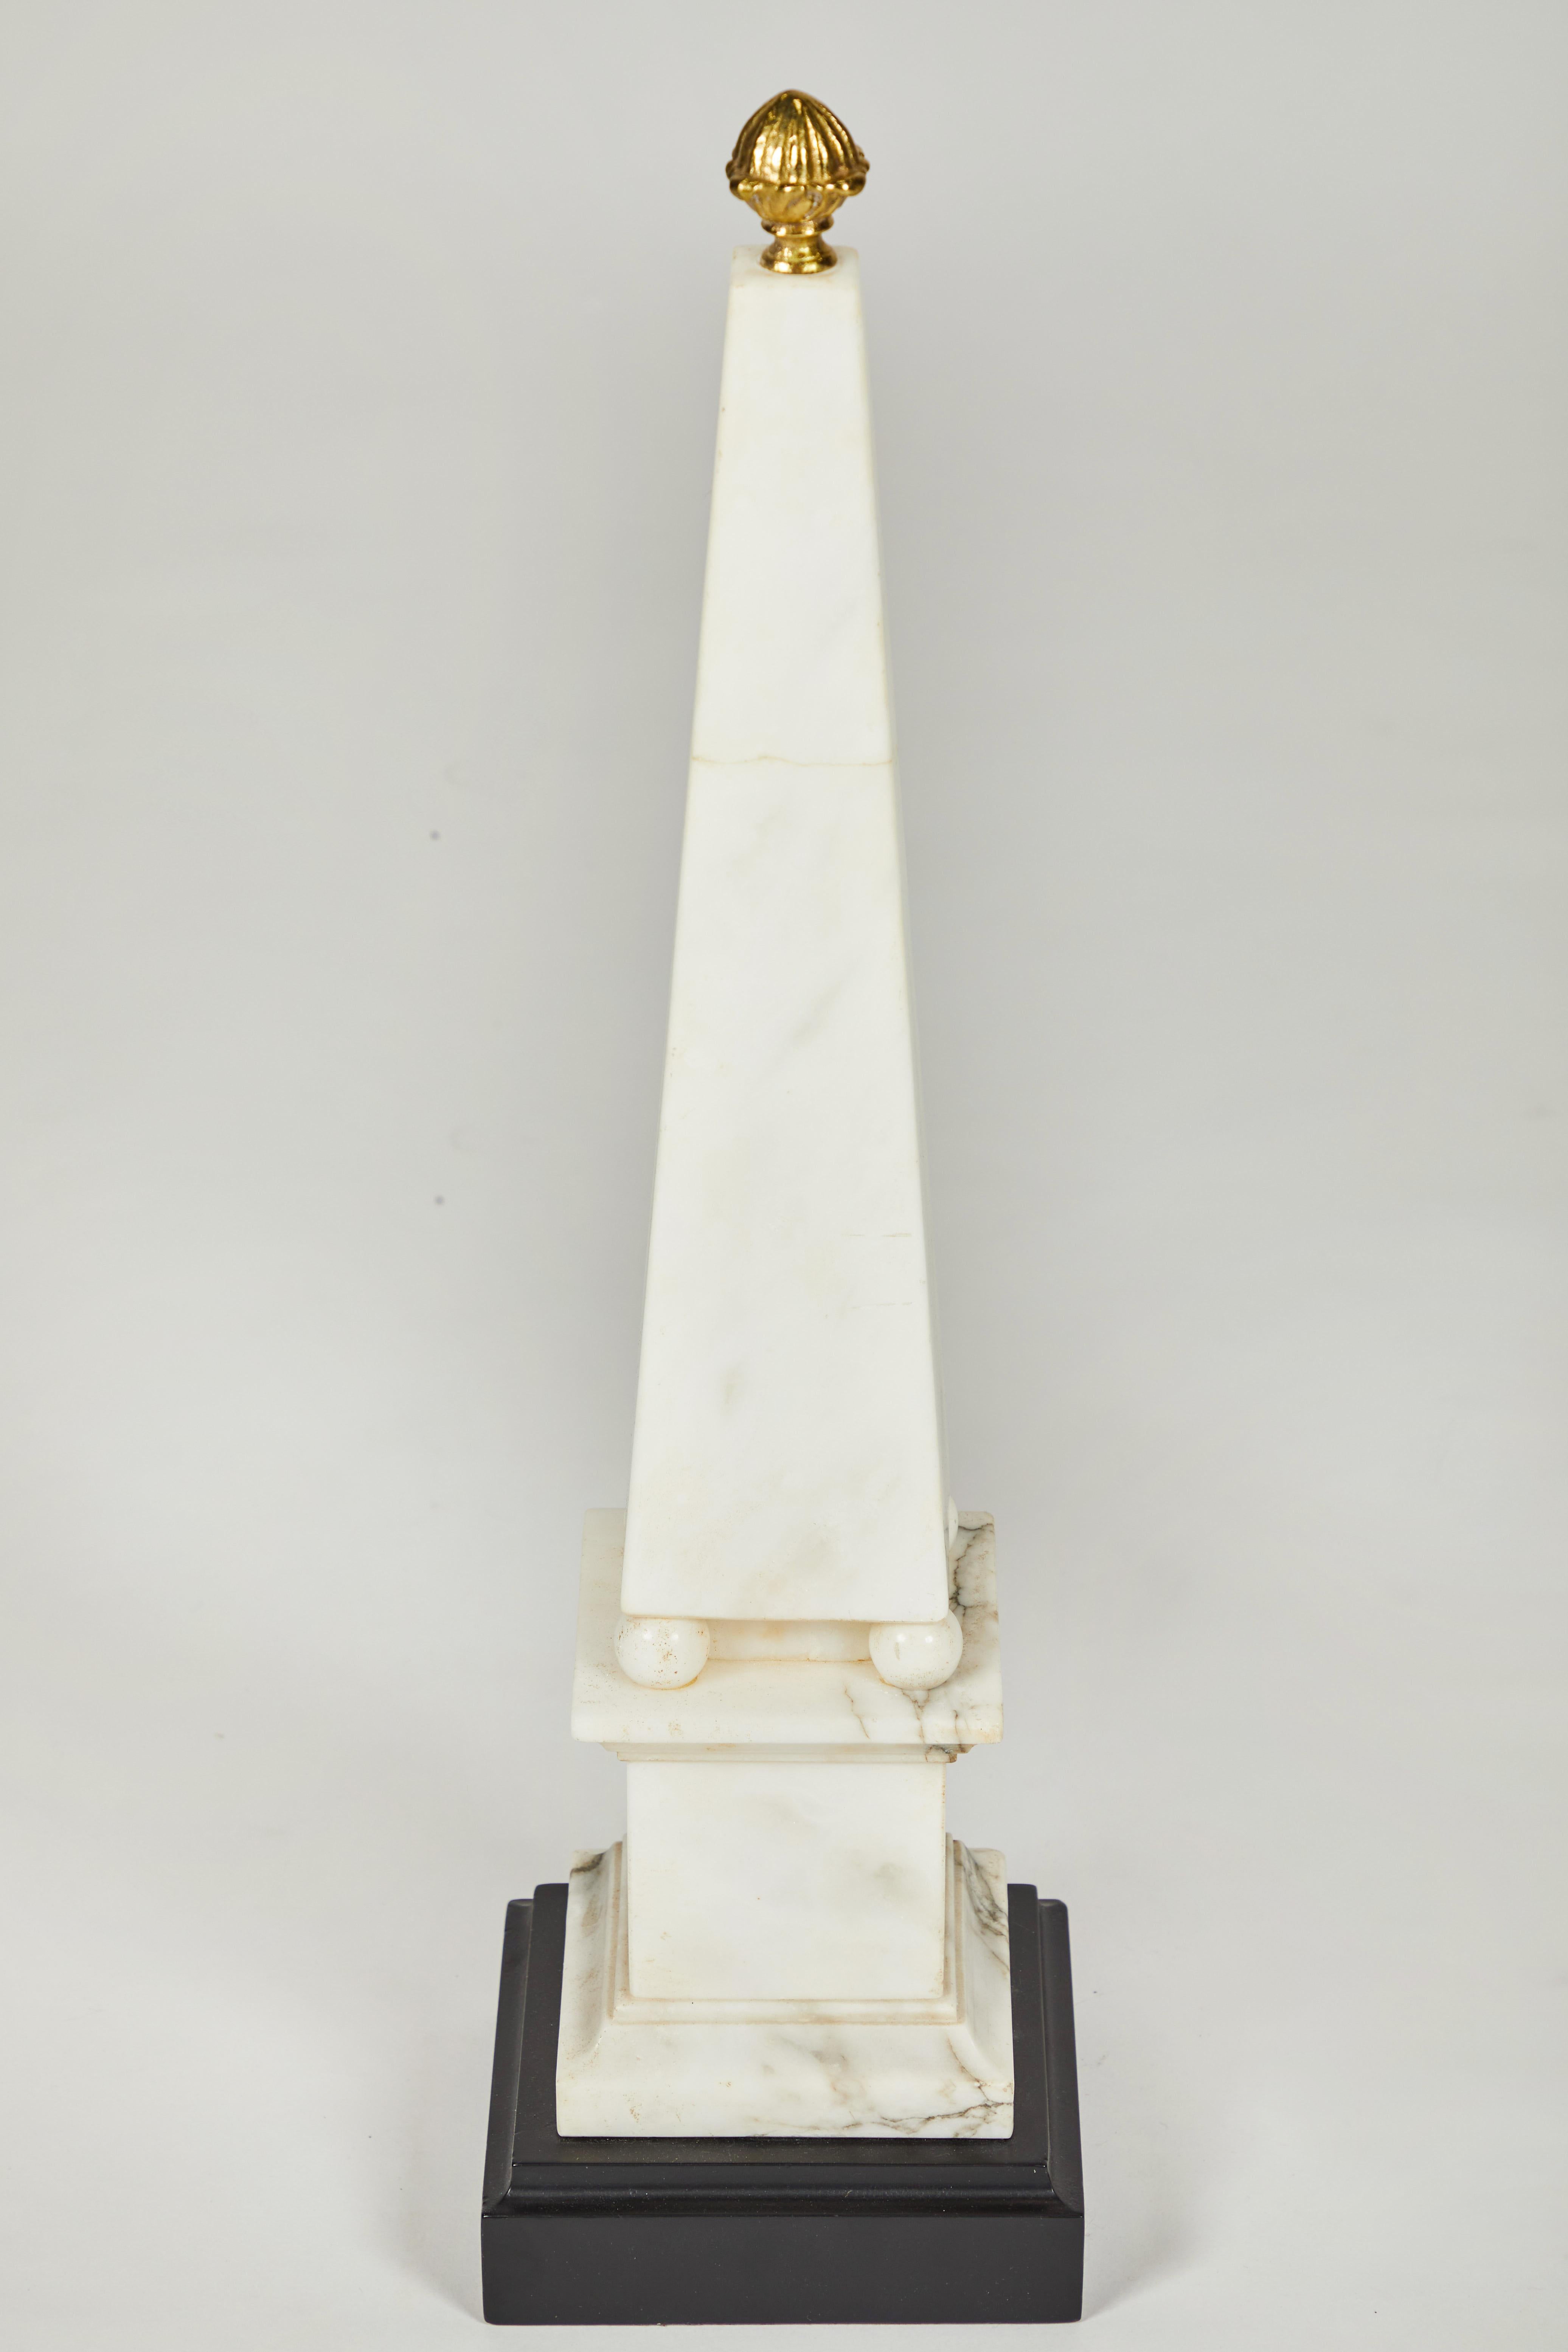 Pair of white marble obelisks on painted wood bases with brass acorn finials.